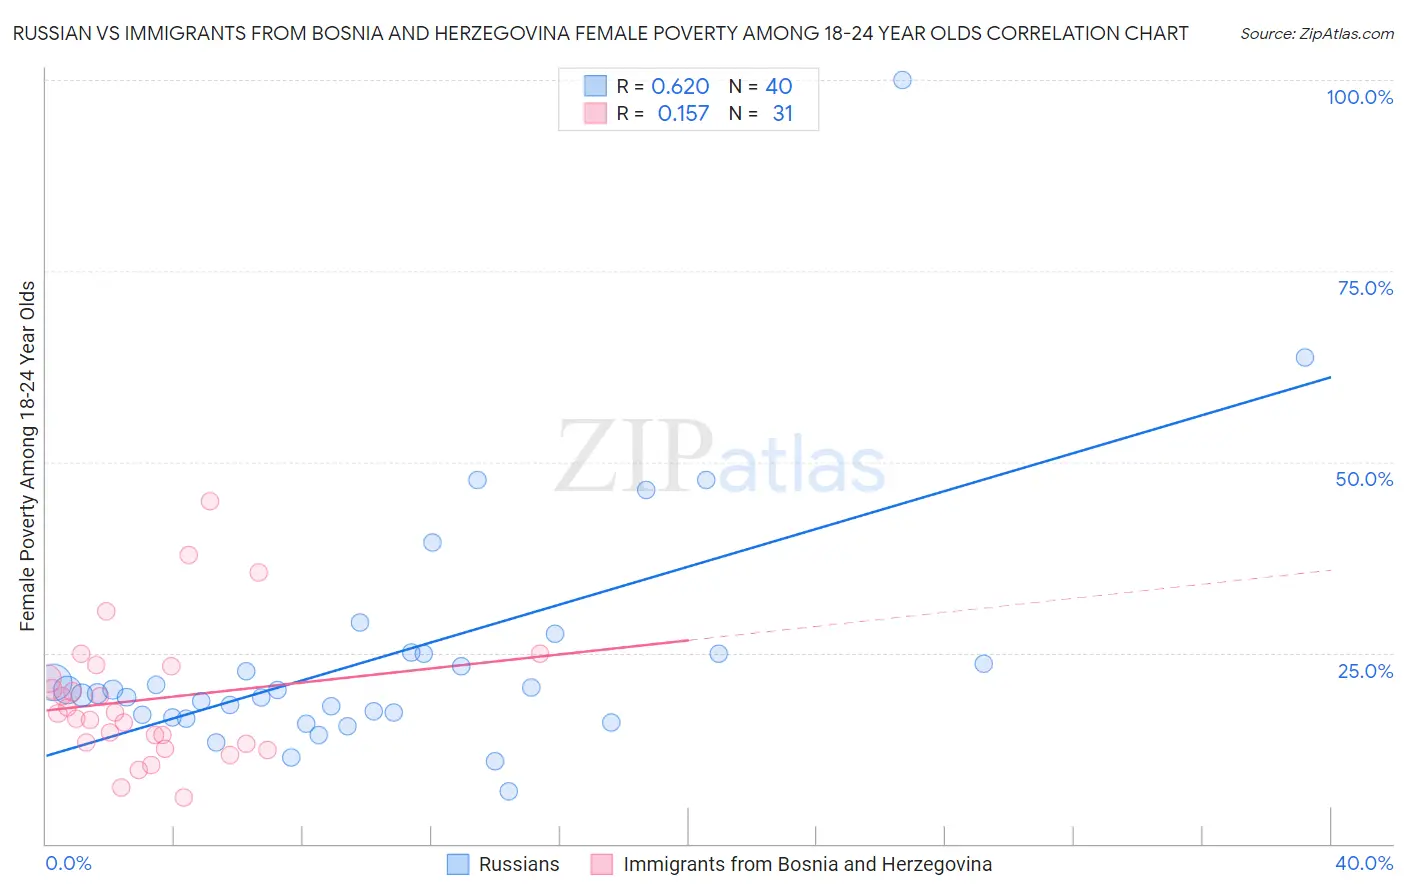 Russian vs Immigrants from Bosnia and Herzegovina Female Poverty Among 18-24 Year Olds